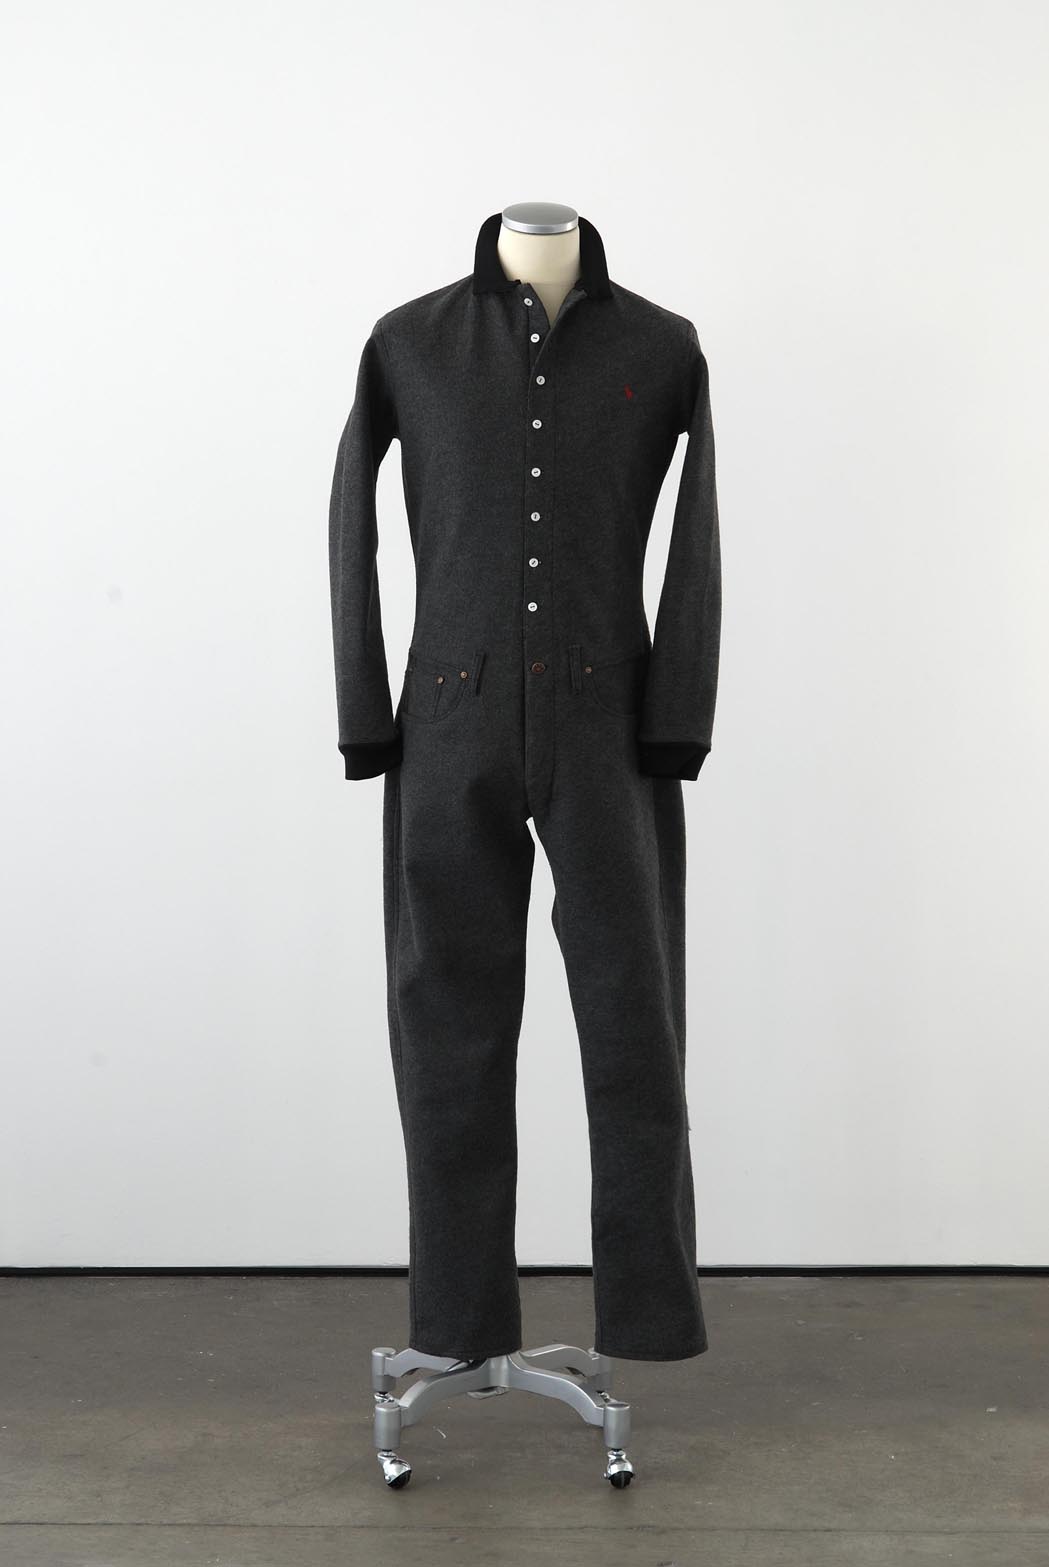     Matthew Darbyshire Standardised Production Clothing, Version 1 2009 Grey felt, cotton jersey &amp; fittings on mannequin 185 x 45 x 34 cm 